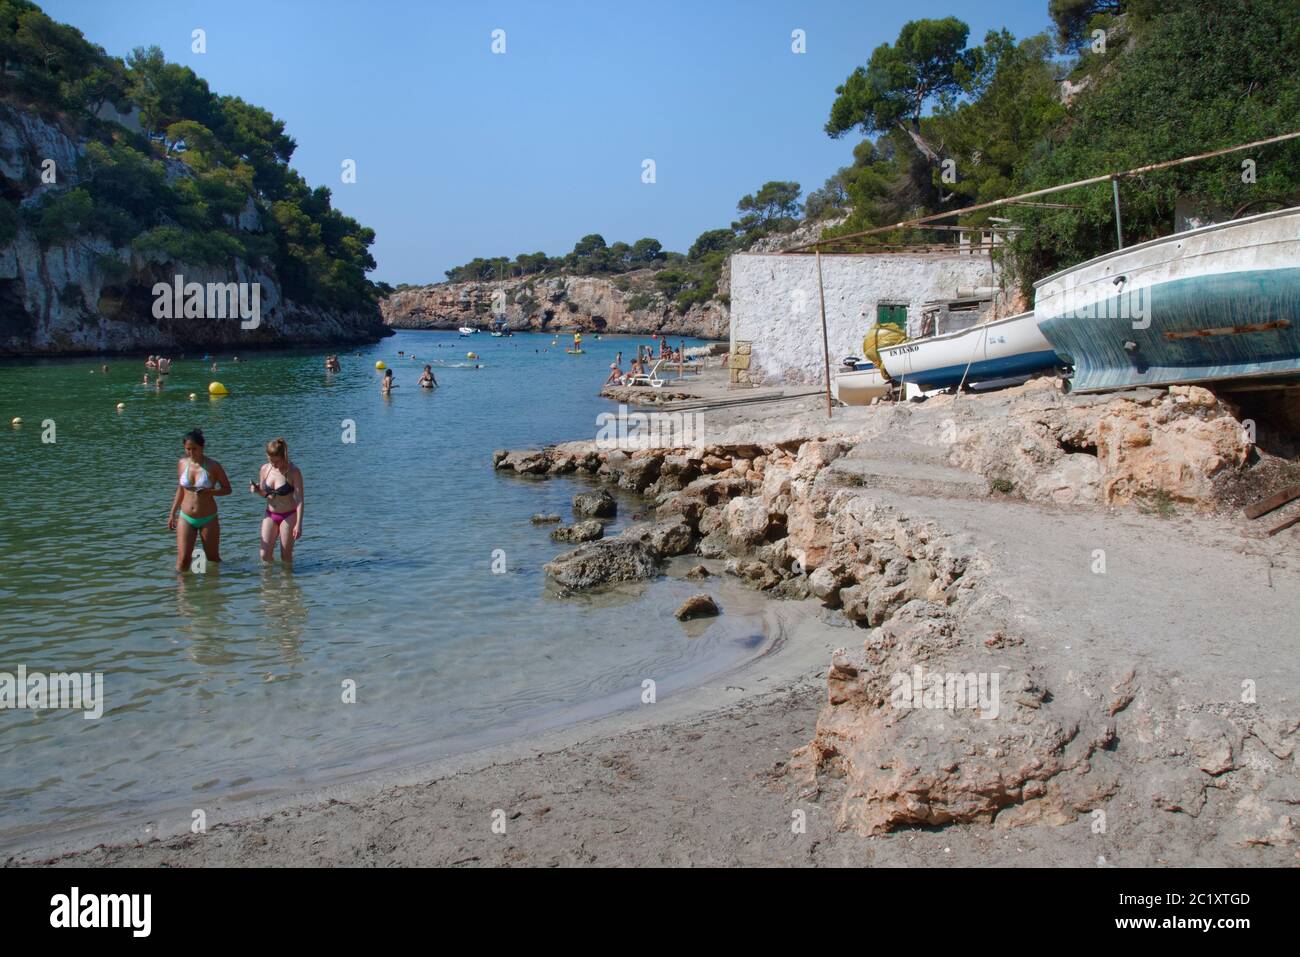 Tourists wading and bathing in the cove at Cala Pi near old boat houses, Mallorca south coast, August. Stock Photo